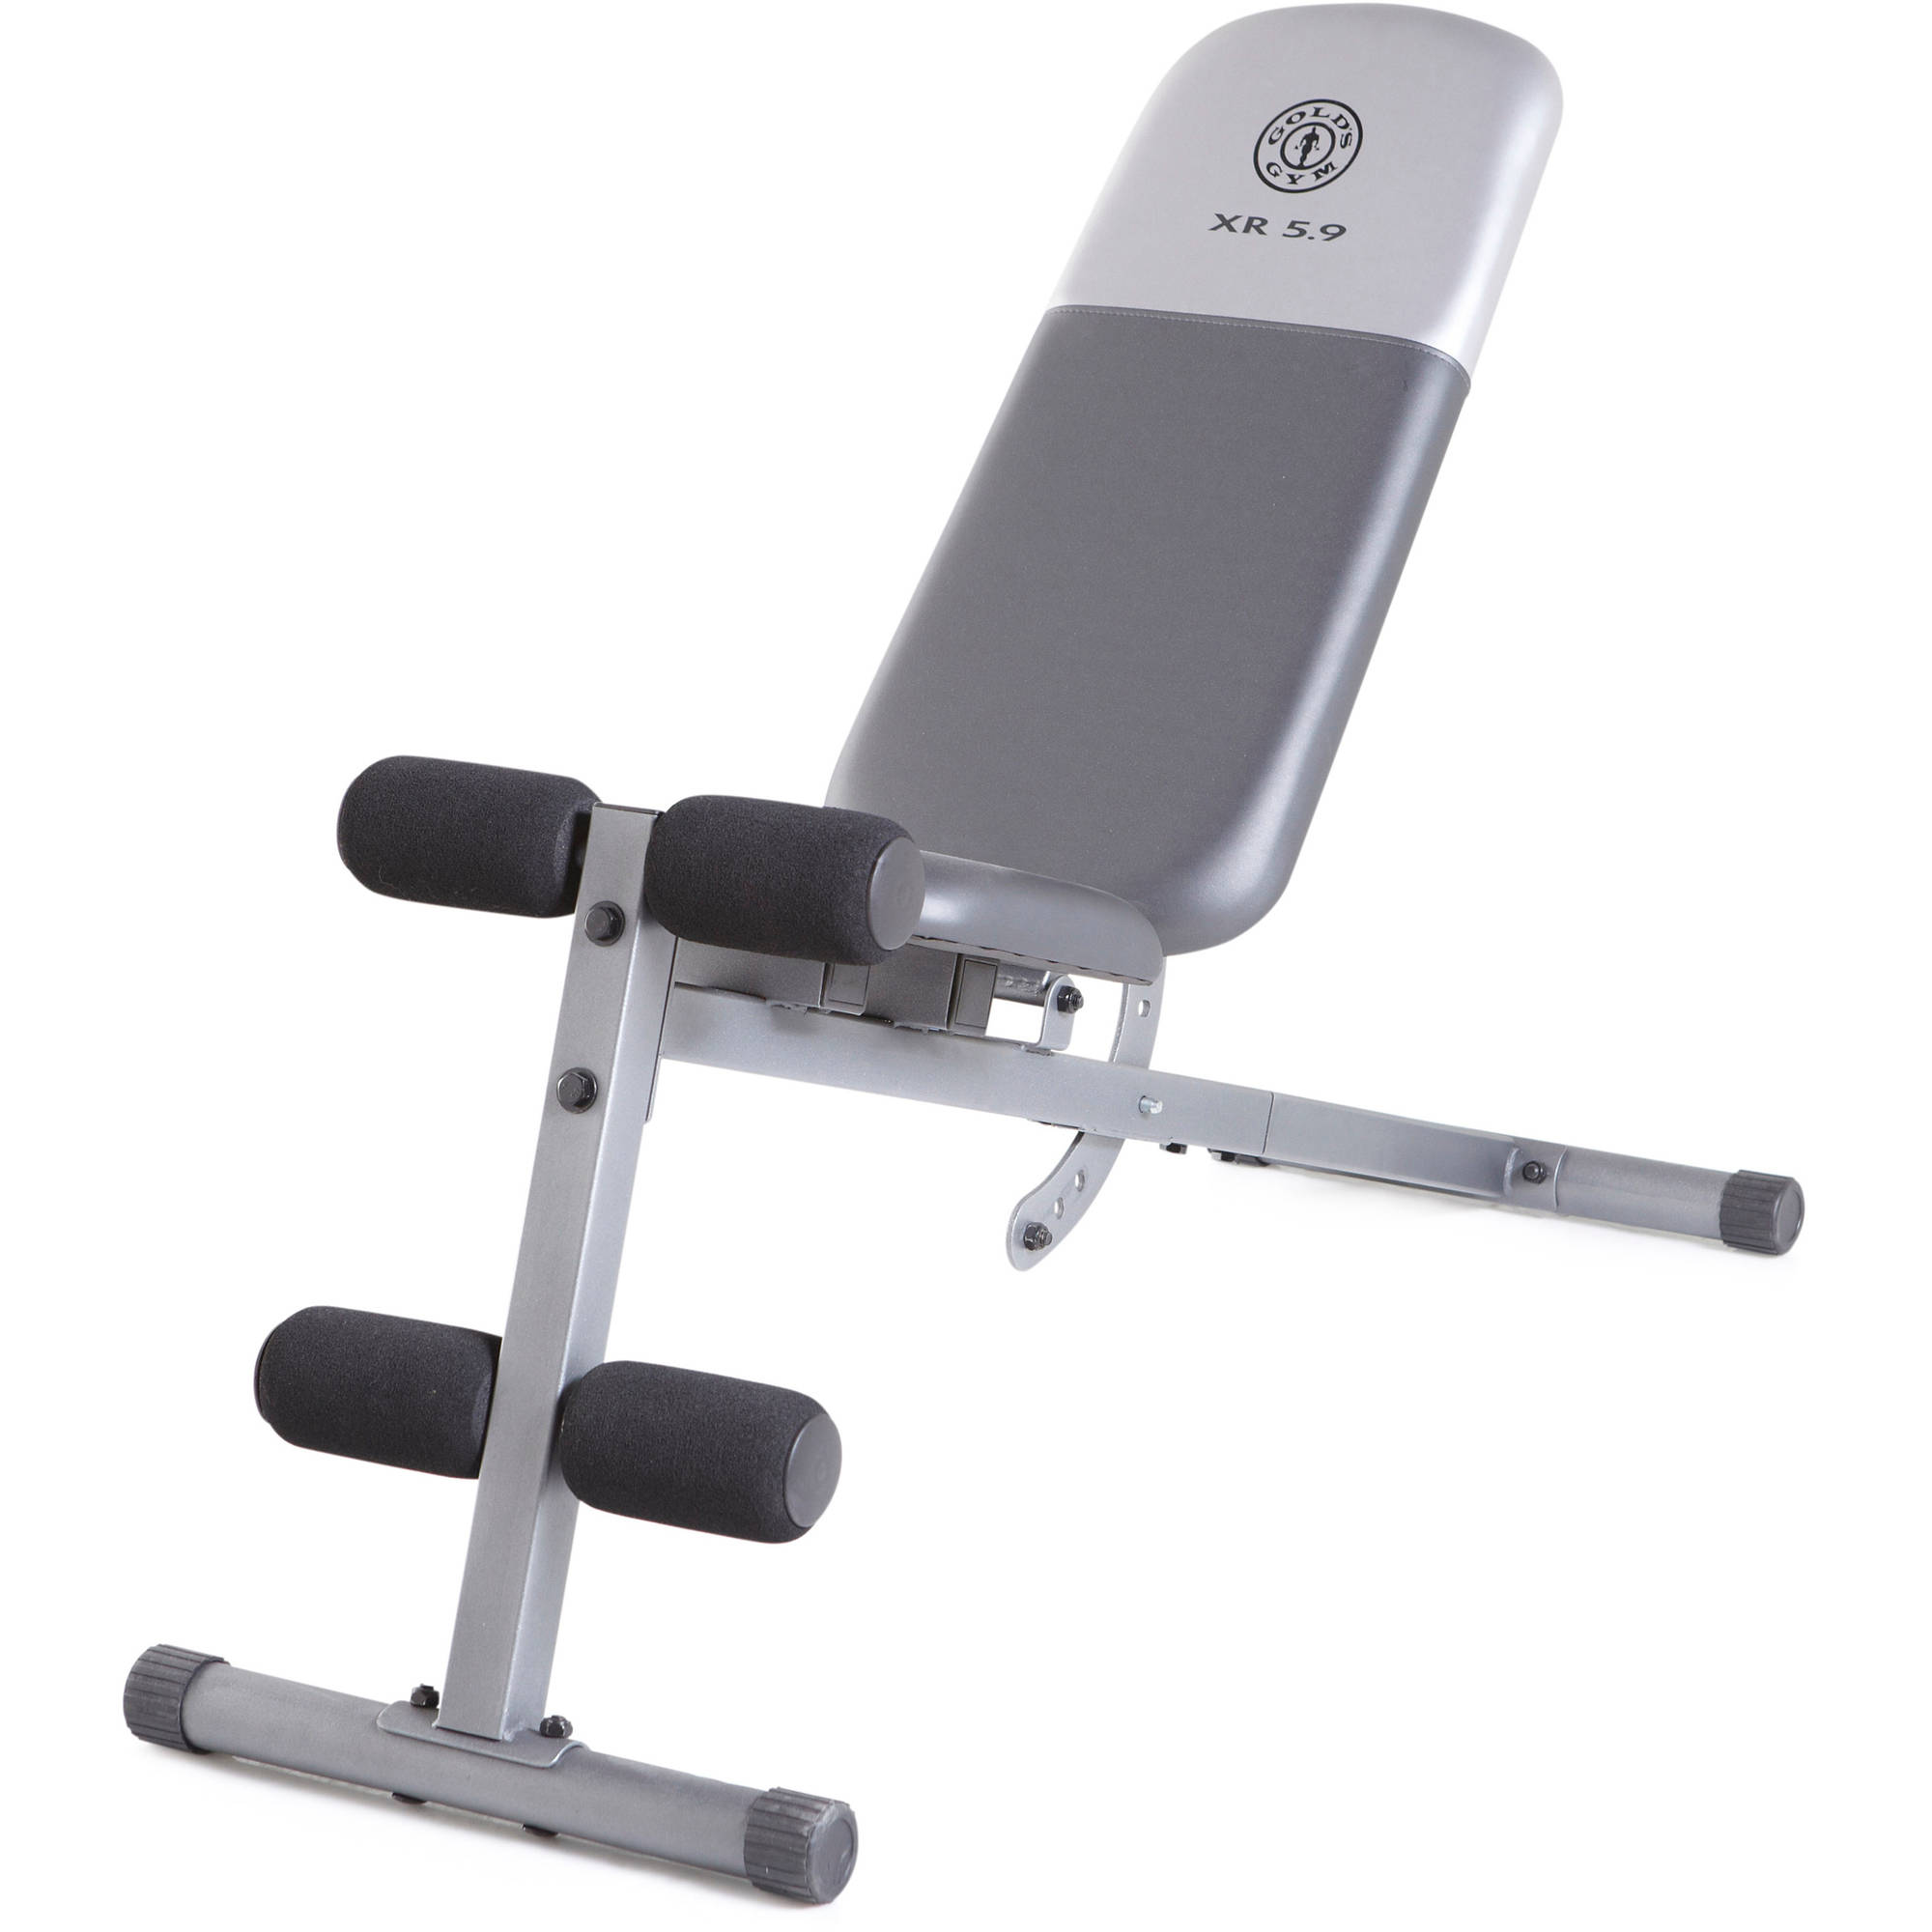 Gold's Gym XR 5.9 Adjustable Slant Workout Weight Bench - image 1 of 4